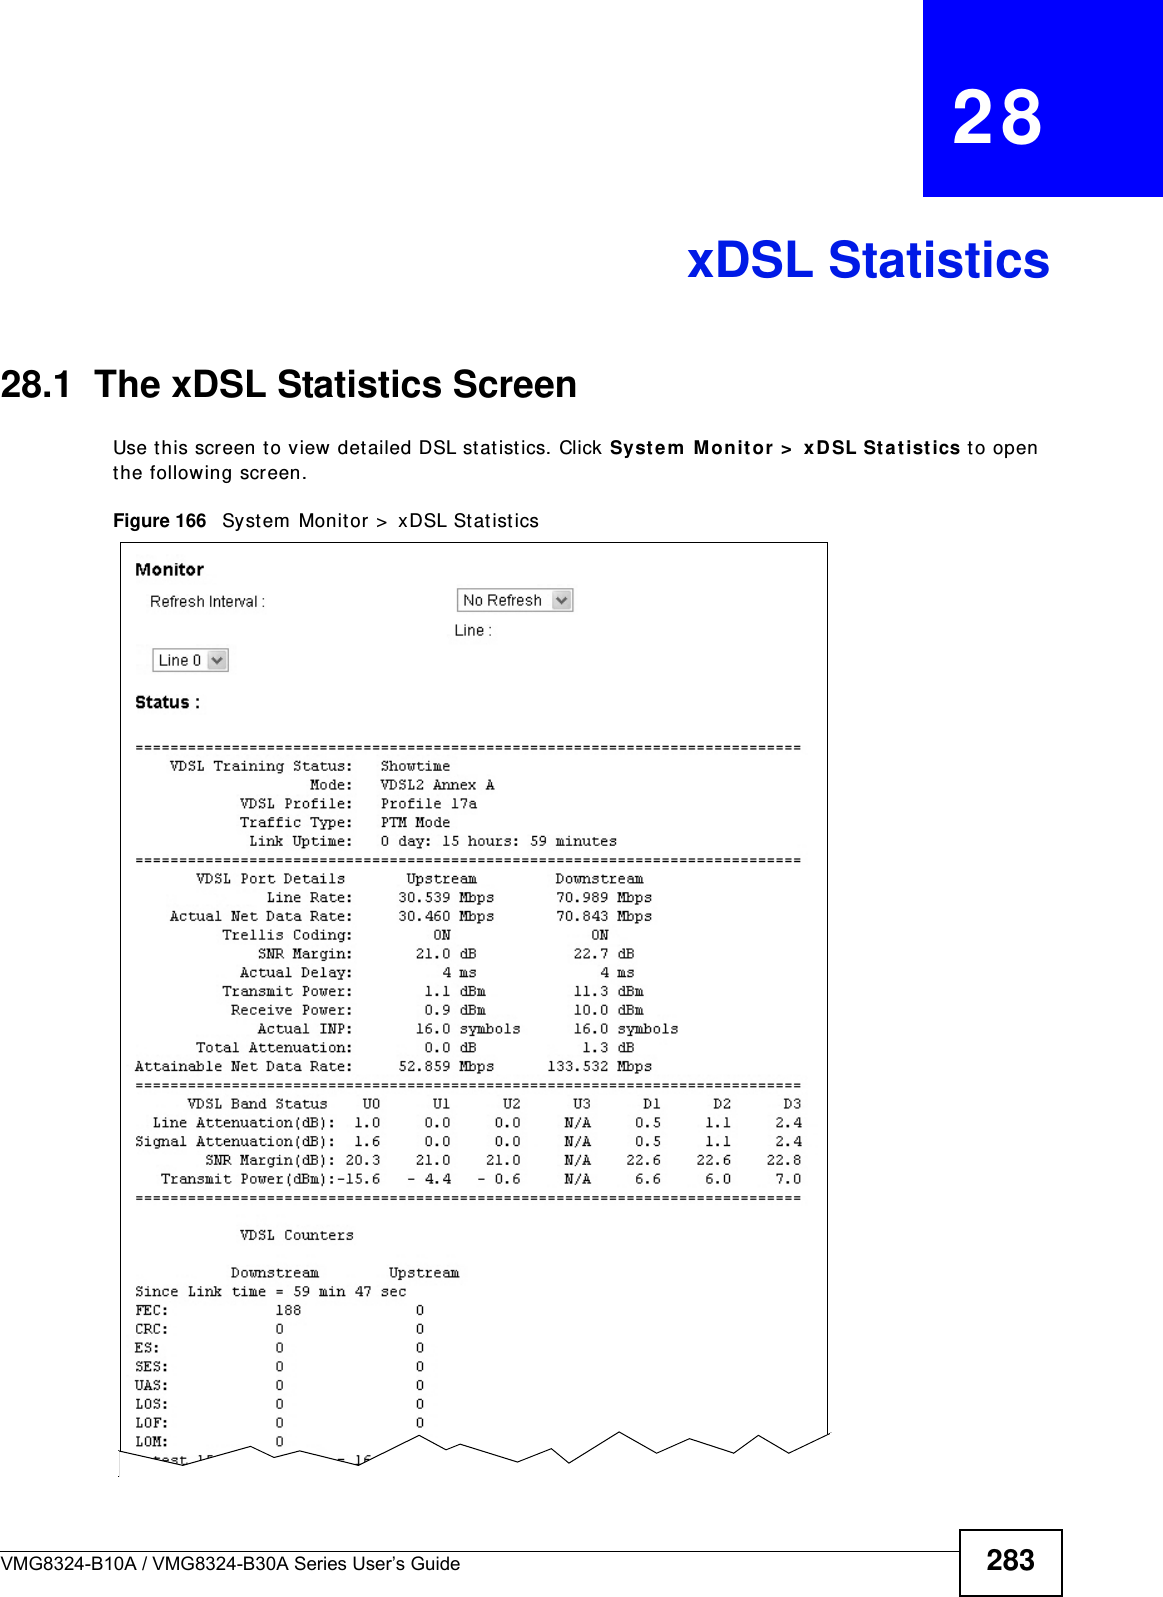 VMG8324-B10A / VMG8324-B30A Series User’s Guide 283CHAPTER   28xDSL Statistics28.1  The xDSL Statistics ScreenUse t his screen to view det ailed DSL st atistics. Click Syst em  M onitor &gt;  xD SL St at ist ics to open the following screen.Figure 166   Syst em  Monit or &gt;  xDSL St atistics